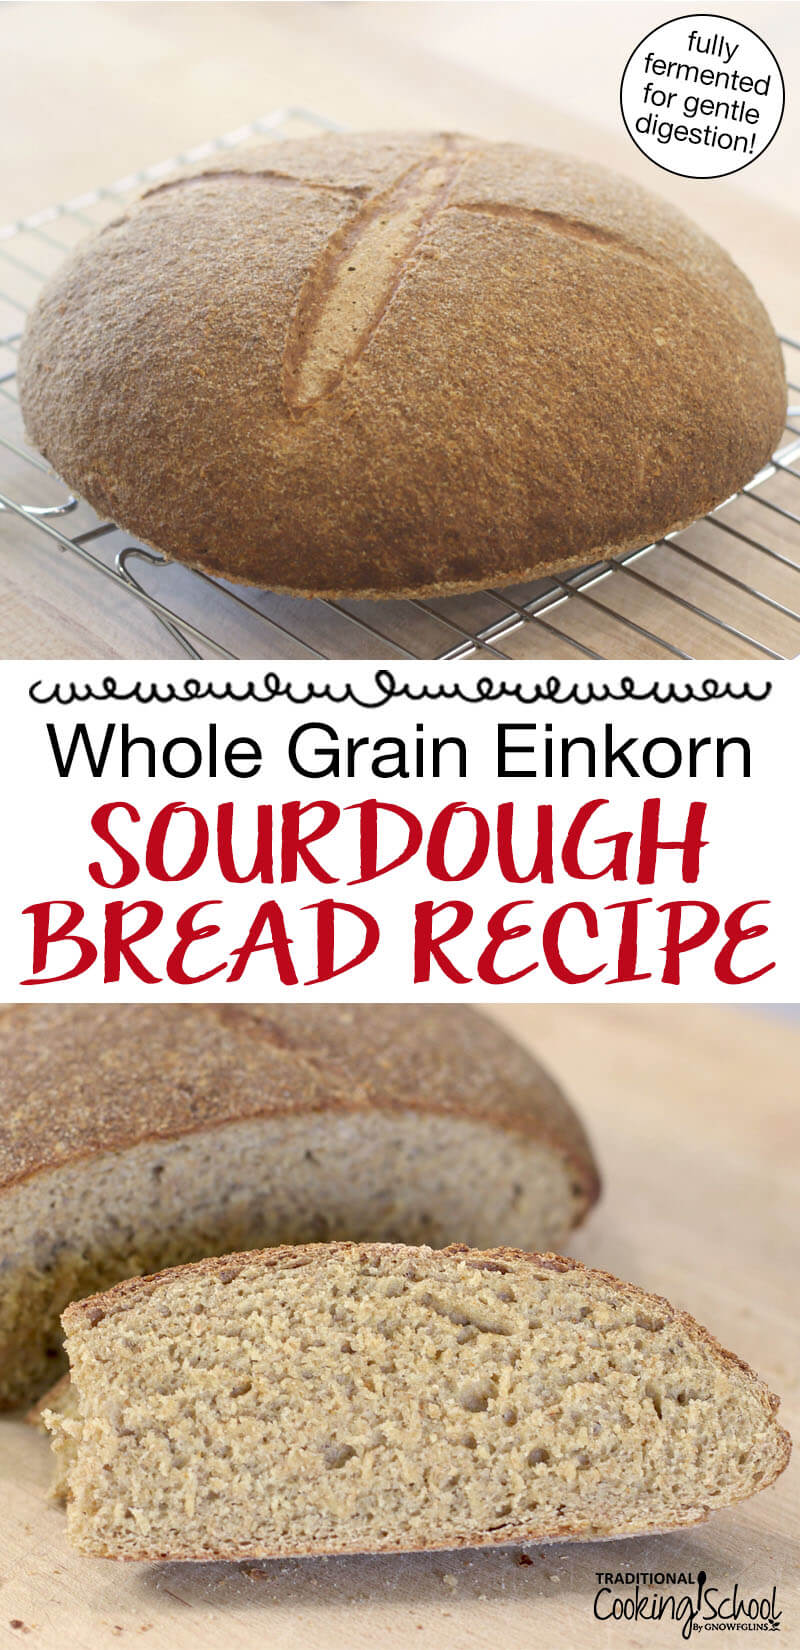 Photo collage of sourdough bread cooling, and slices of the finished loaf (one is buttered). Text overlay says: "Whole Grain Einkorn Sourdough Bread Recipe (fully fermented for gentle digestion!)"